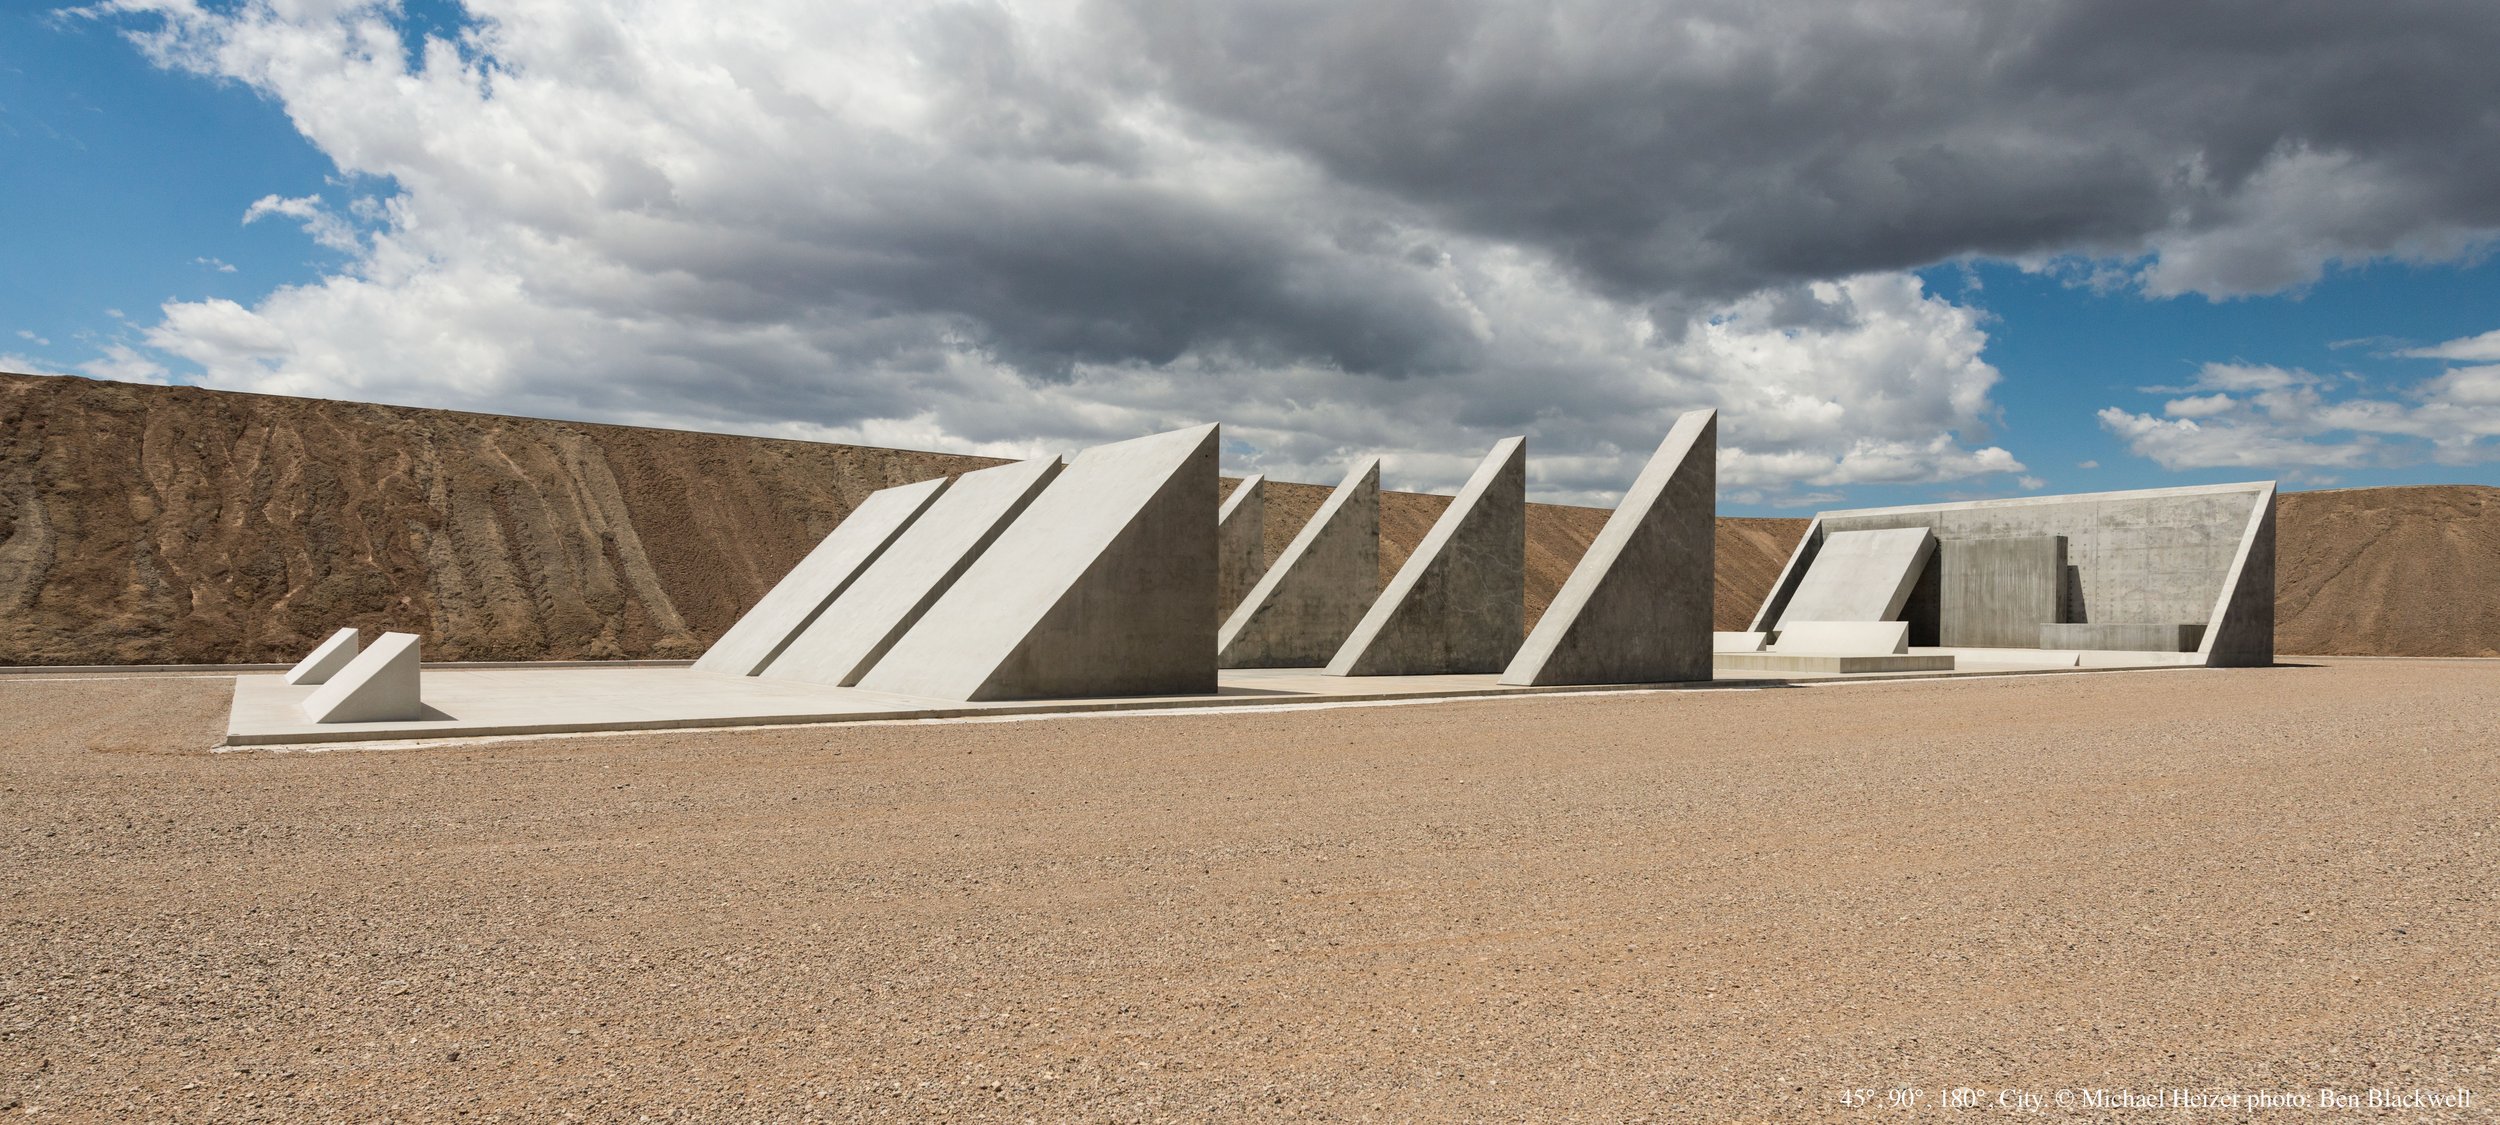  City, 1970-2022 by Michael Heizer 